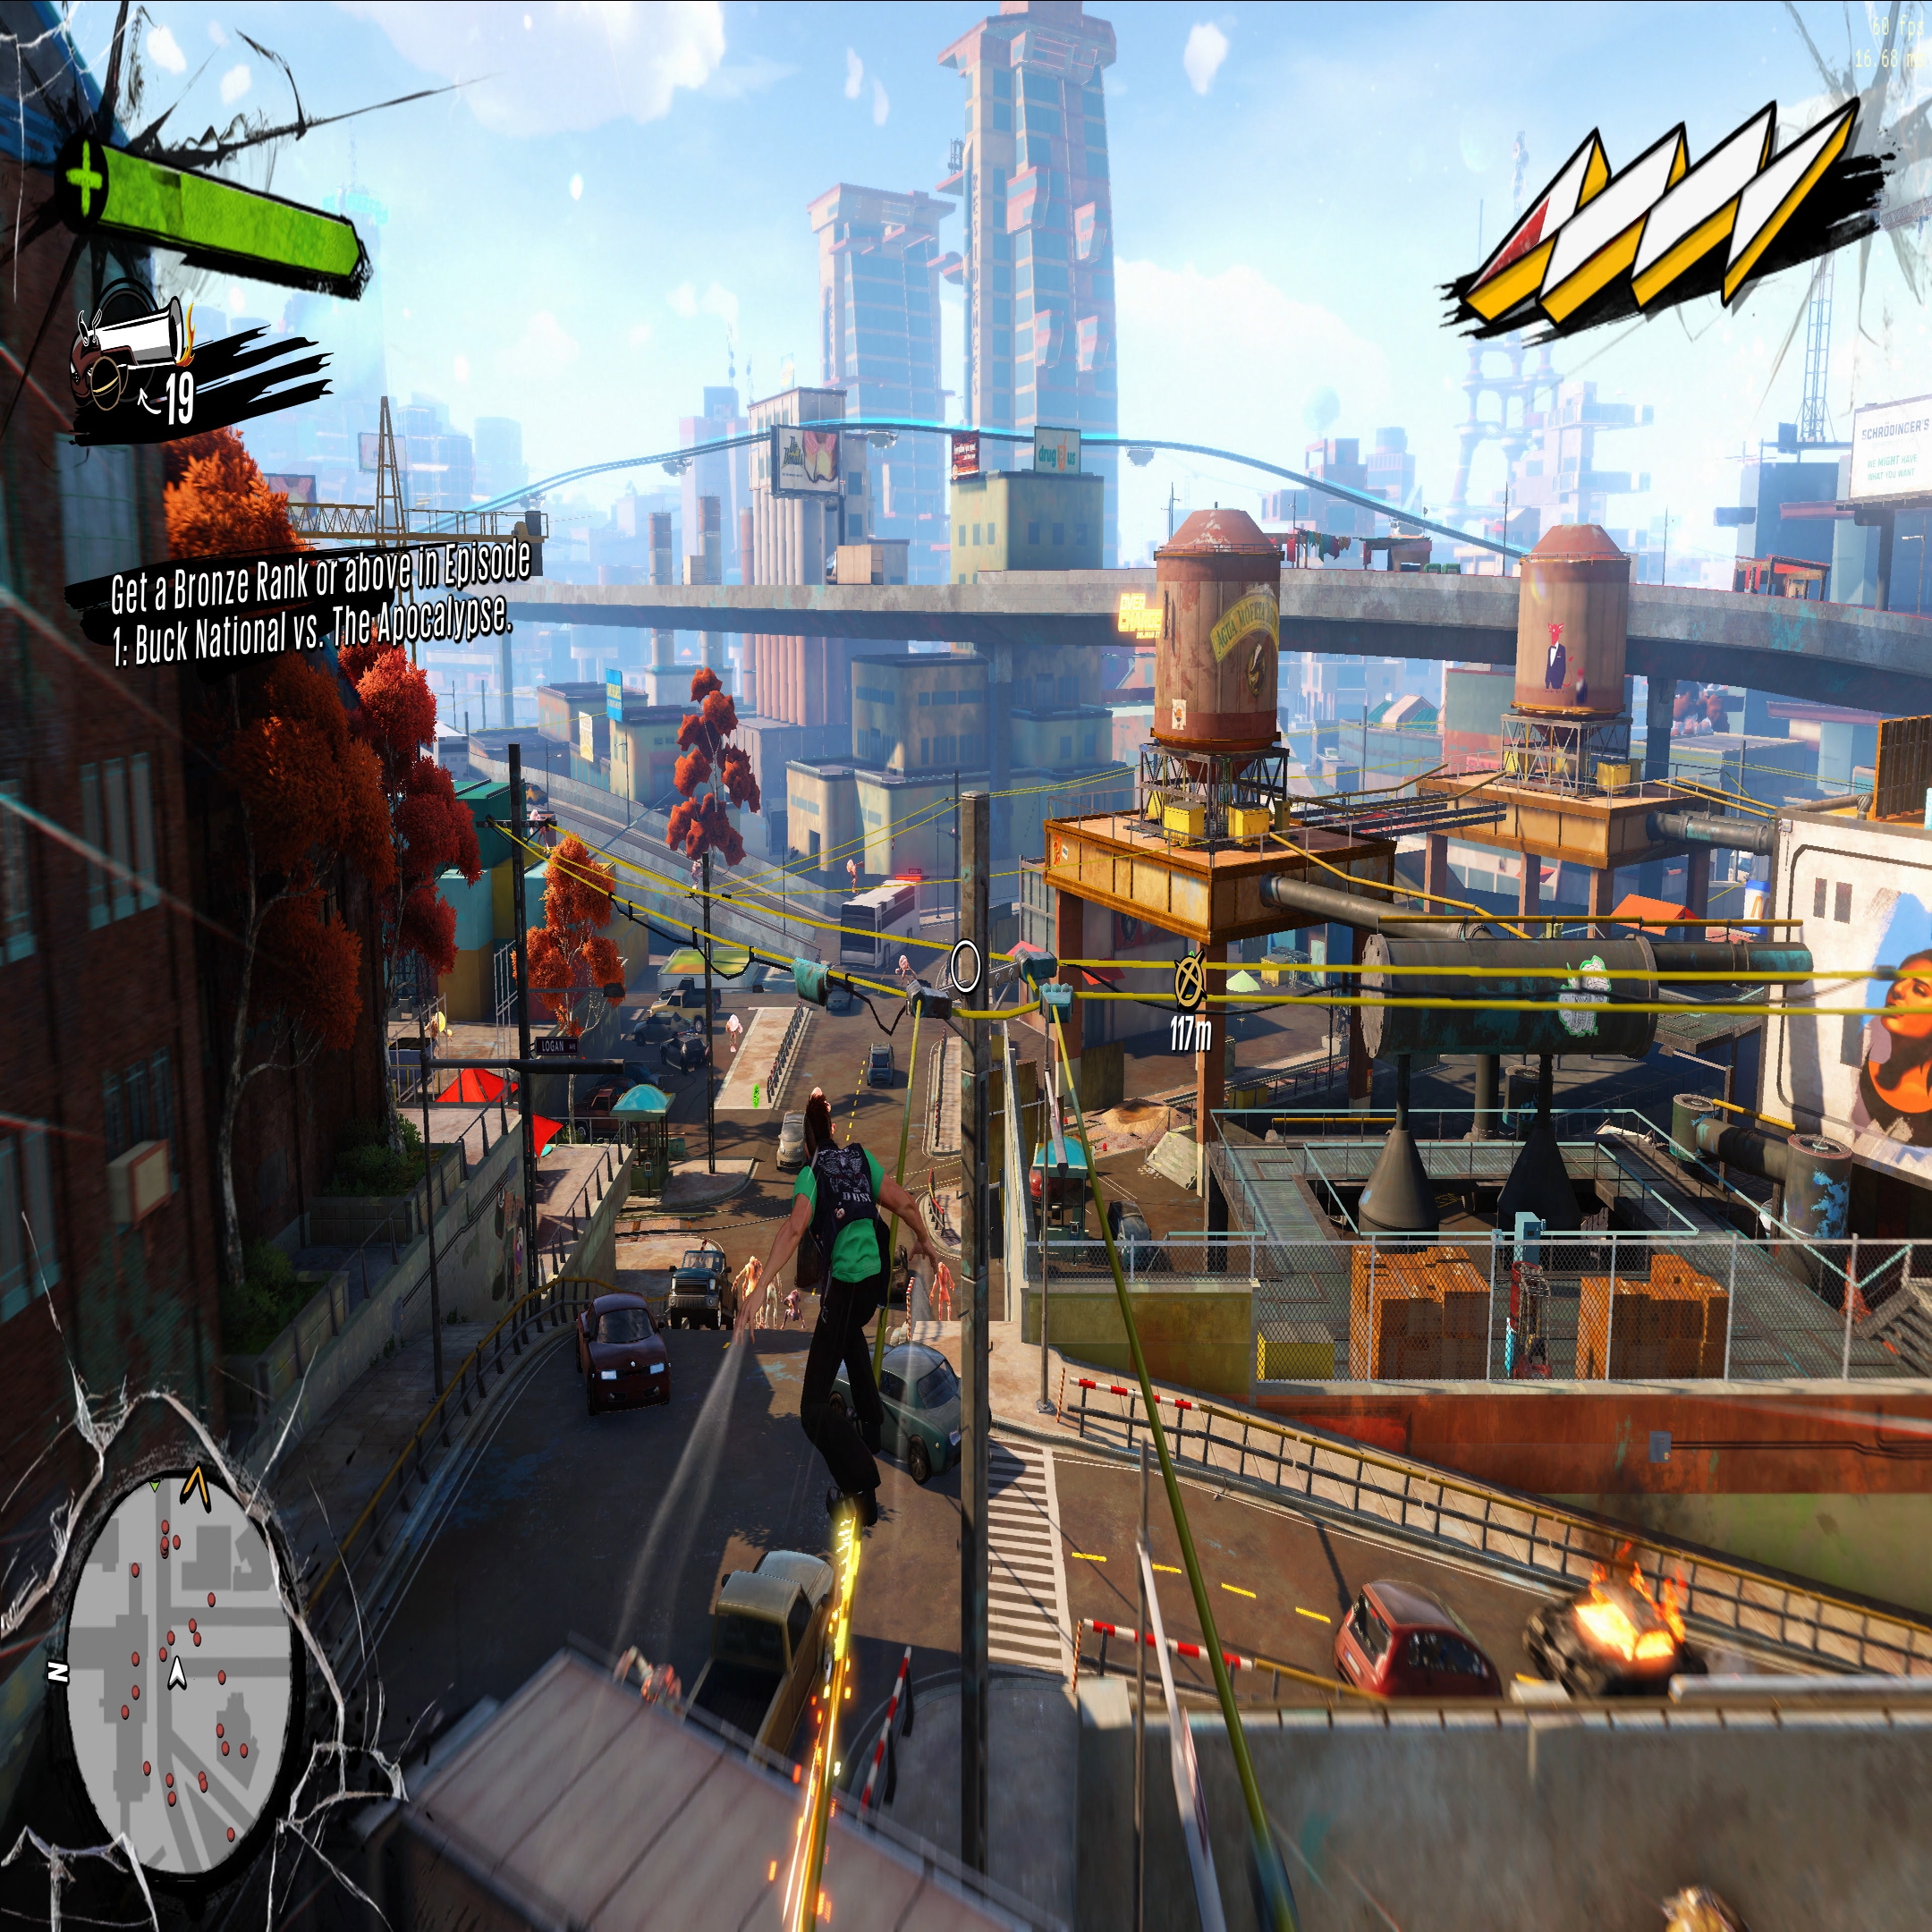 Sunset Overdrive PC: the game's great - but the port is basic